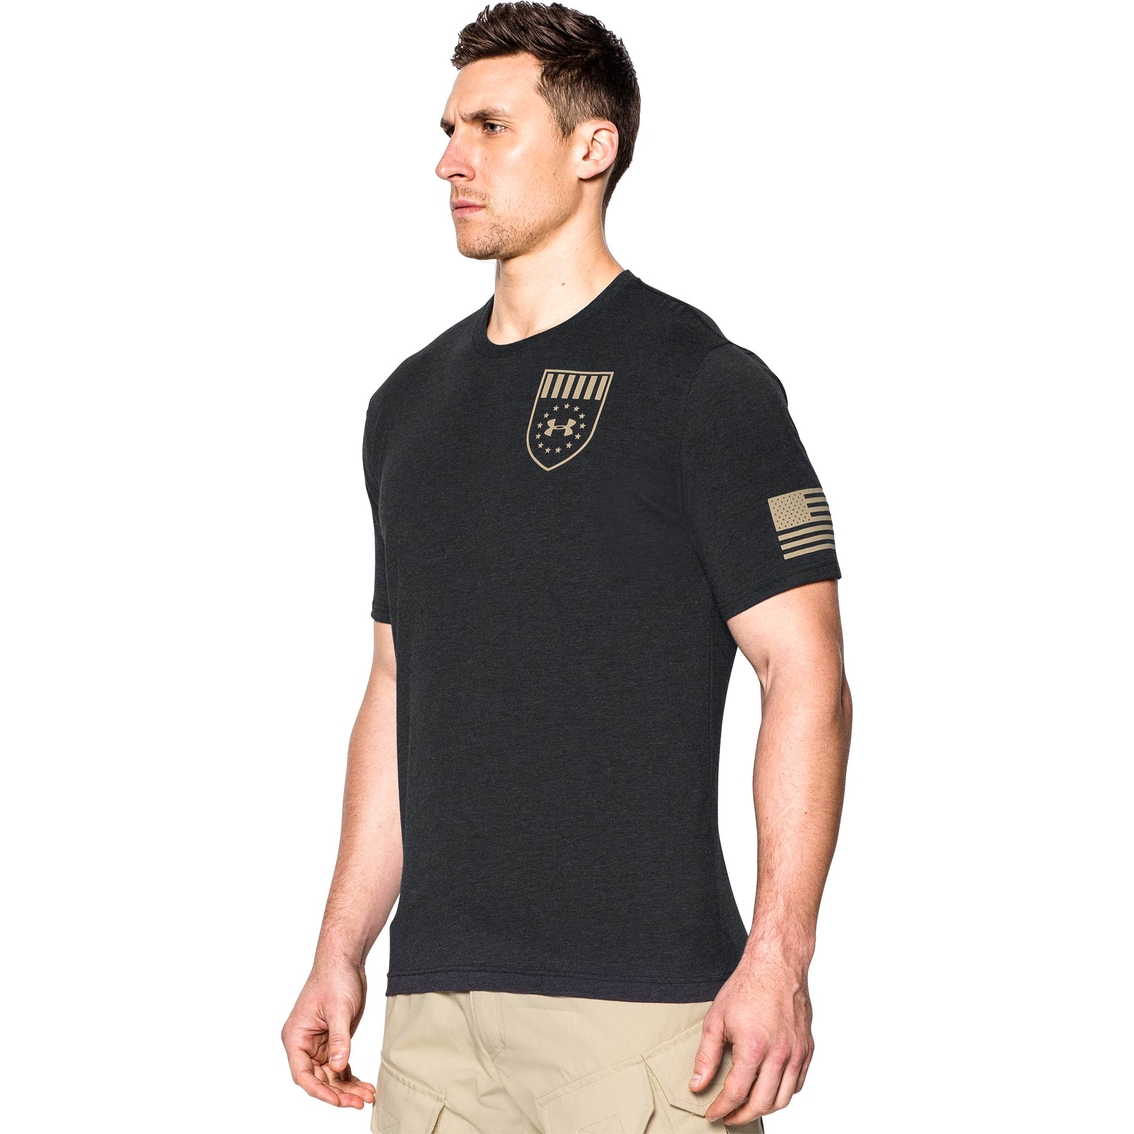 Under Armour Freedom Eagle Men's T-shirt, Shirts, Clothing & Accessories